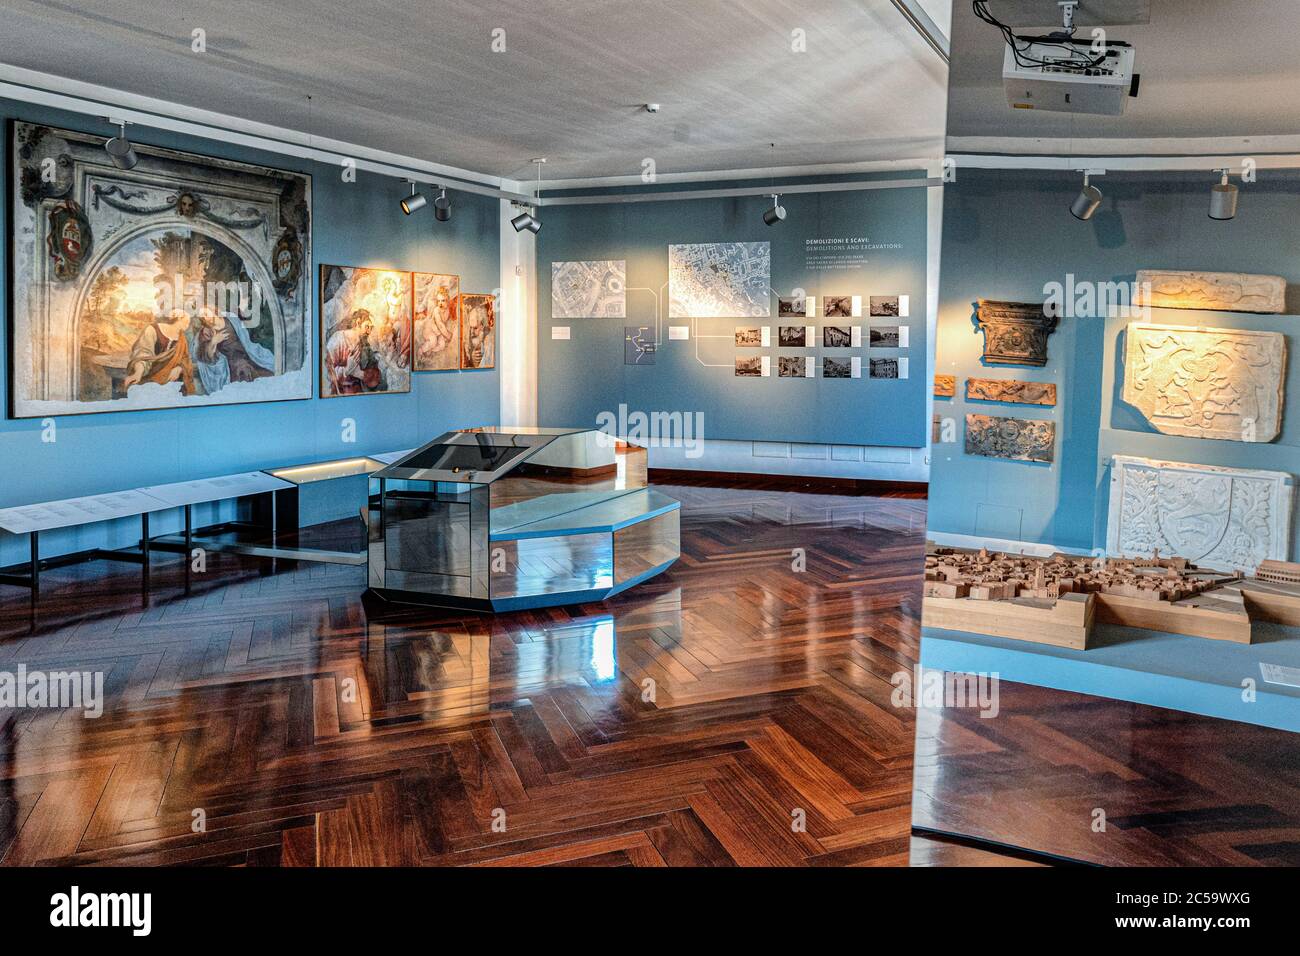 Italy lazio Room with fragments of detached frescoes from the areas of via dei Fori Imperiali and the Spina di Borgo,  on the 3° floor of Palazzo Braschi in Rome Stock Photo